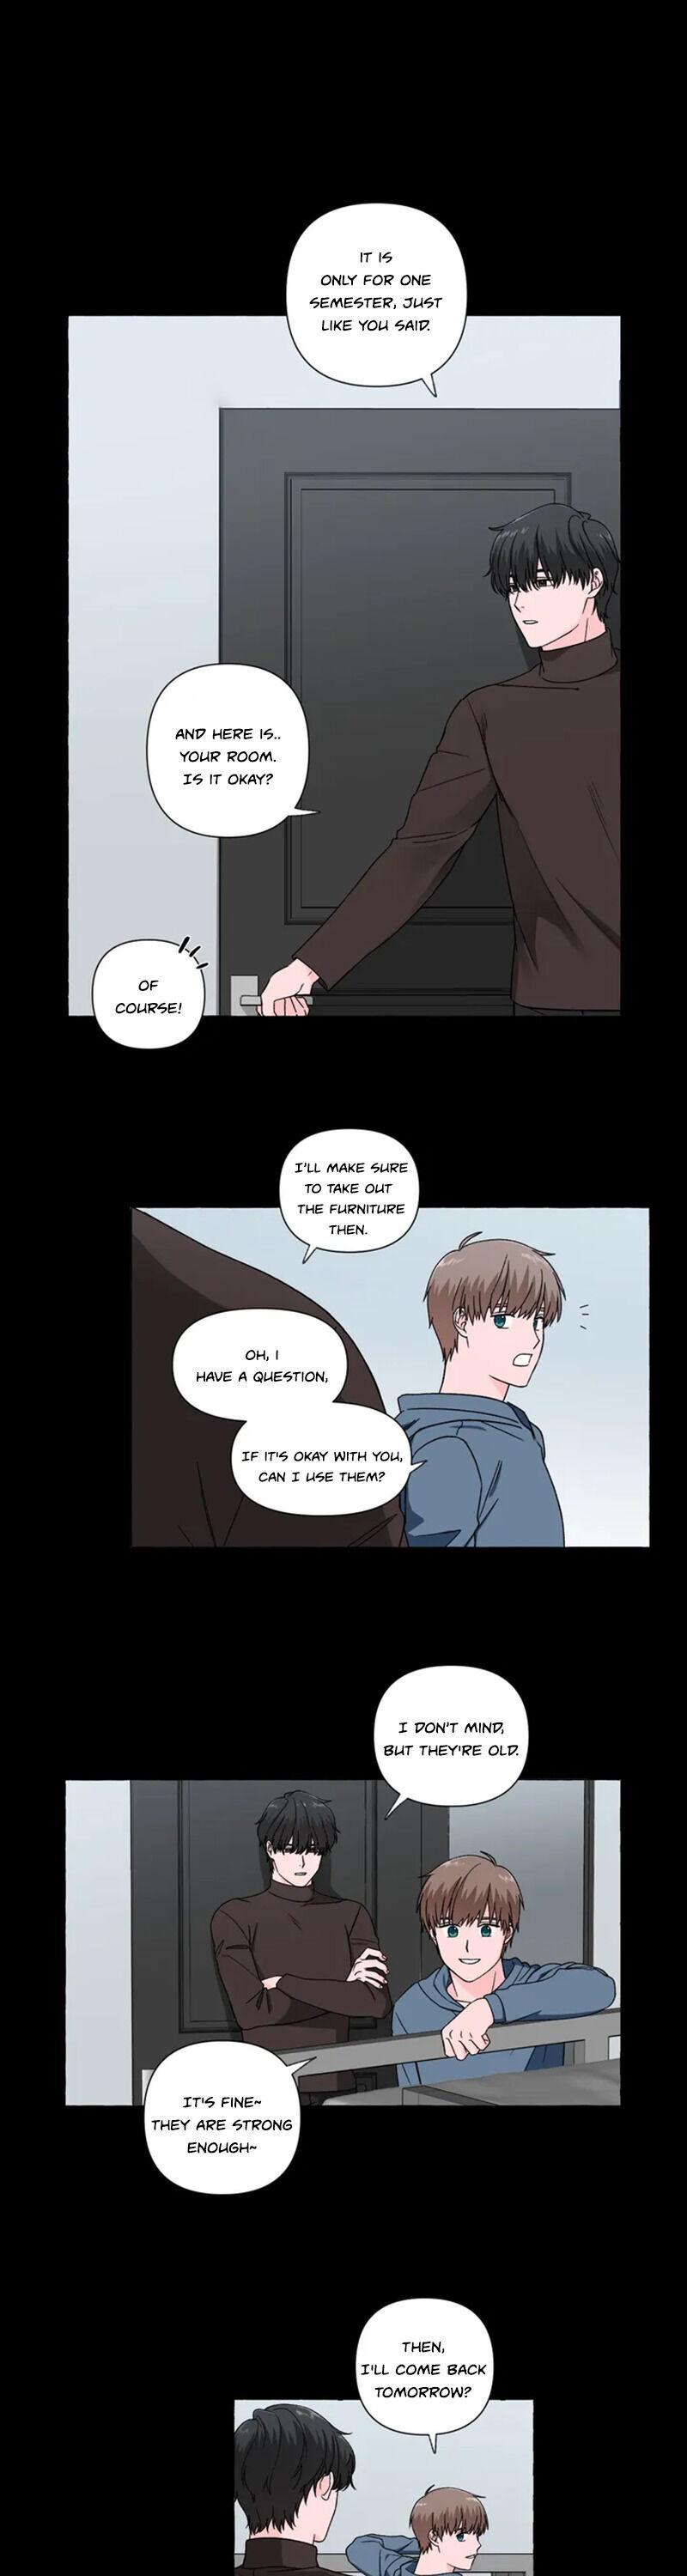 Save Me, Roommate! - Page 2